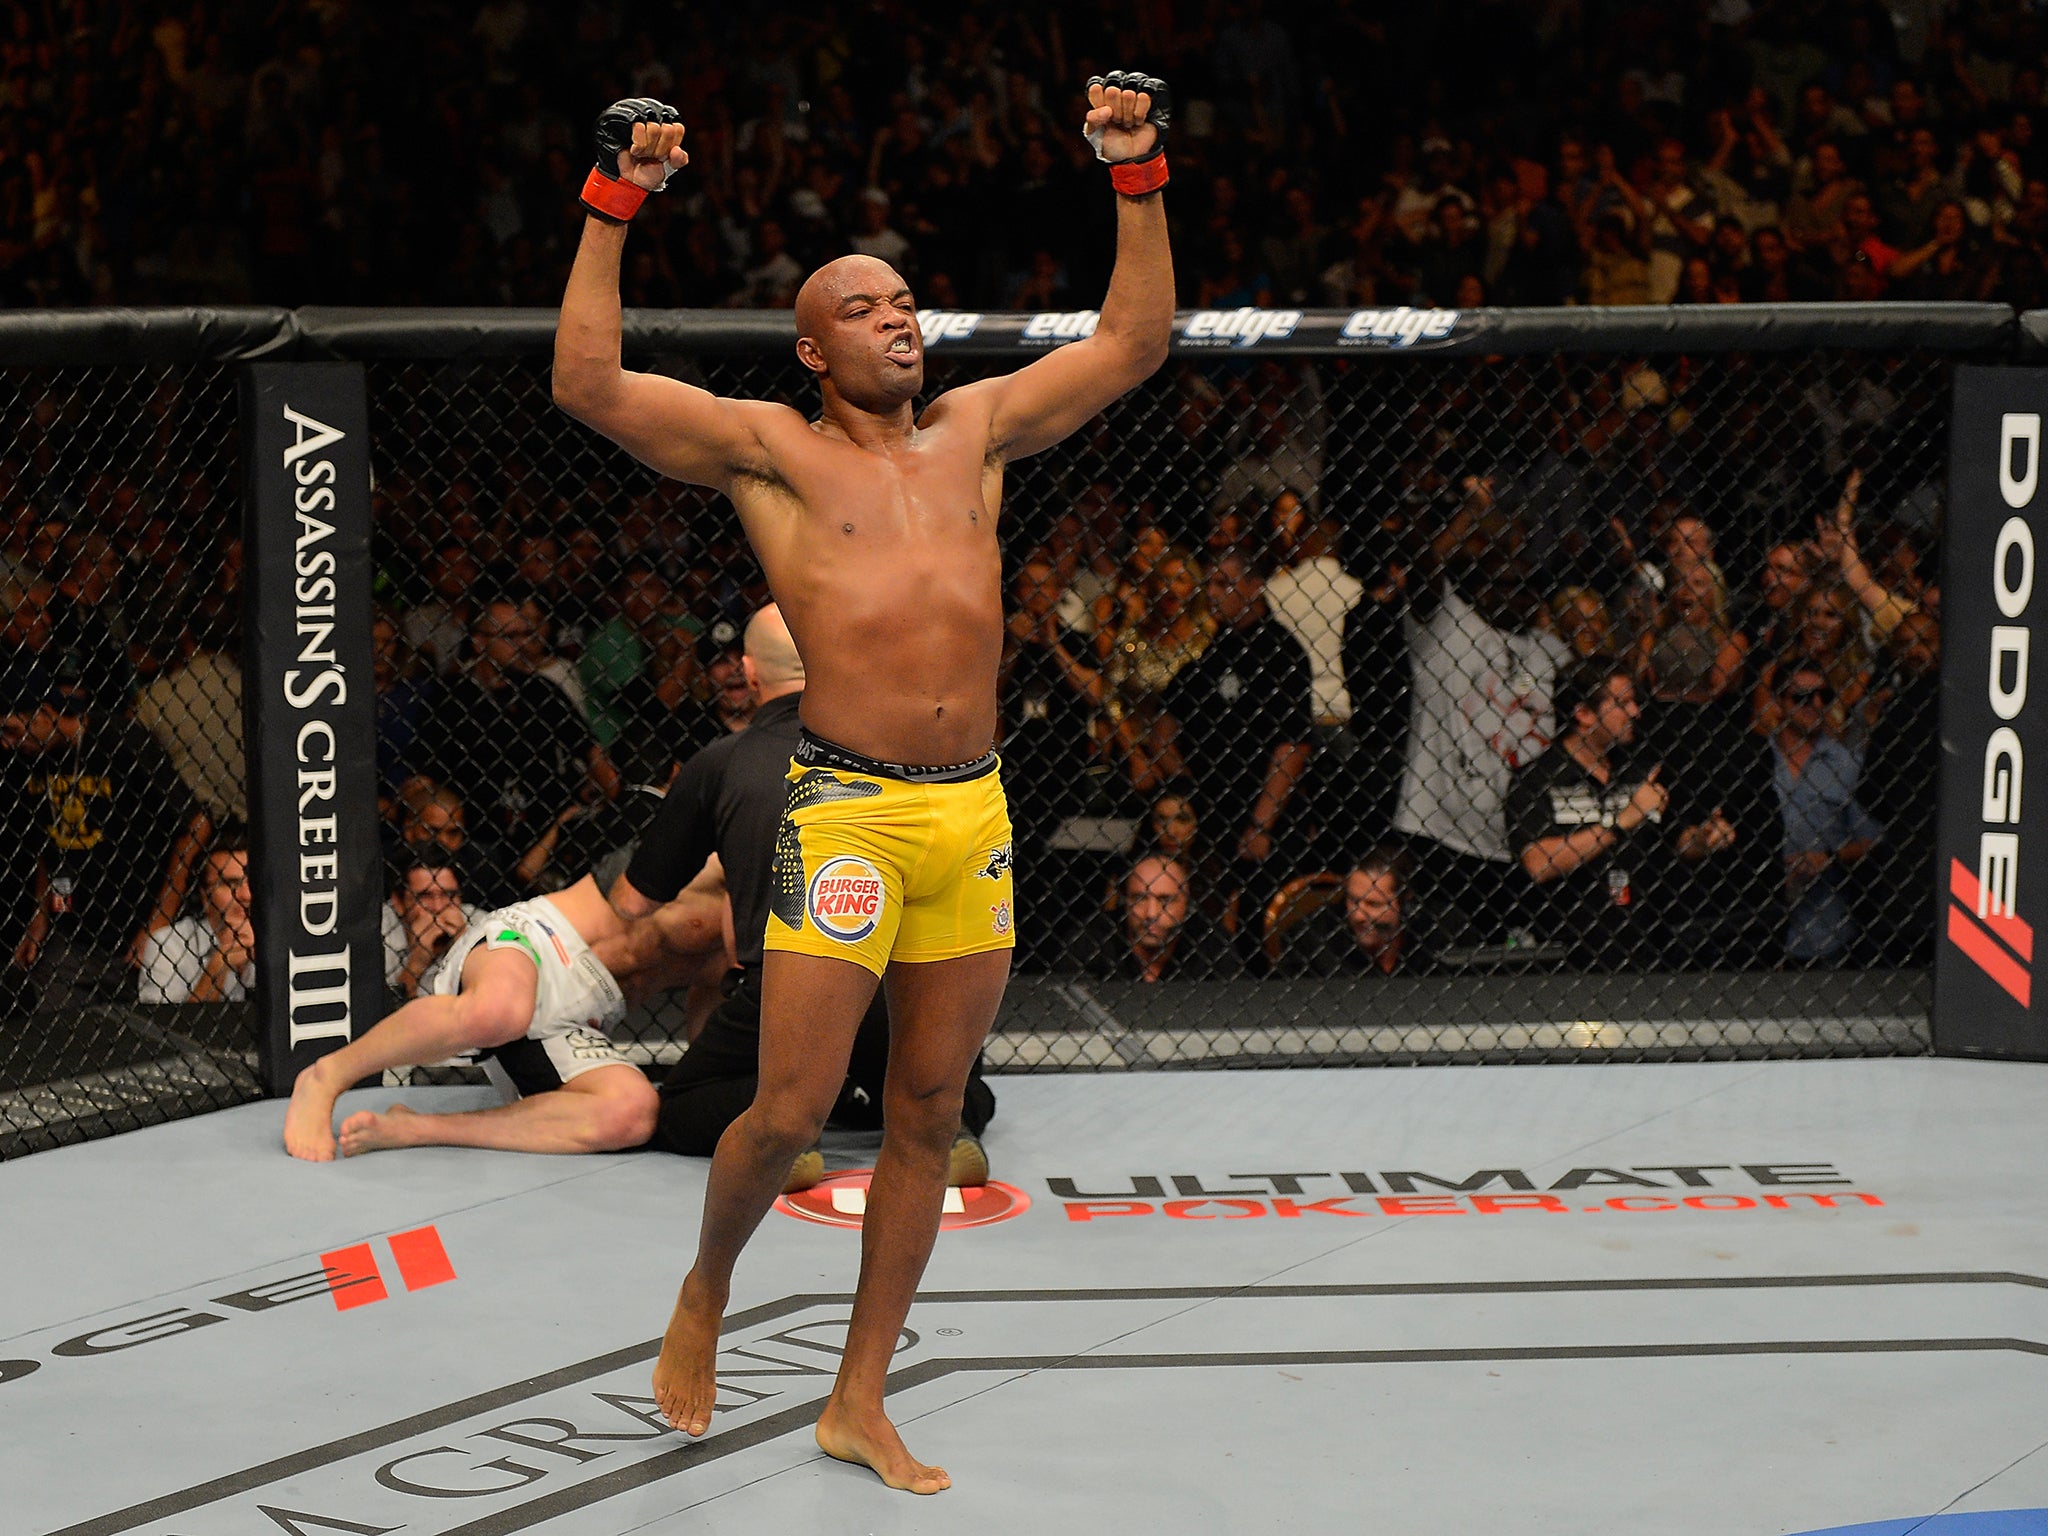 Silva reacts after knocking out Chael Sonnen during their UFC middleweight championship bout